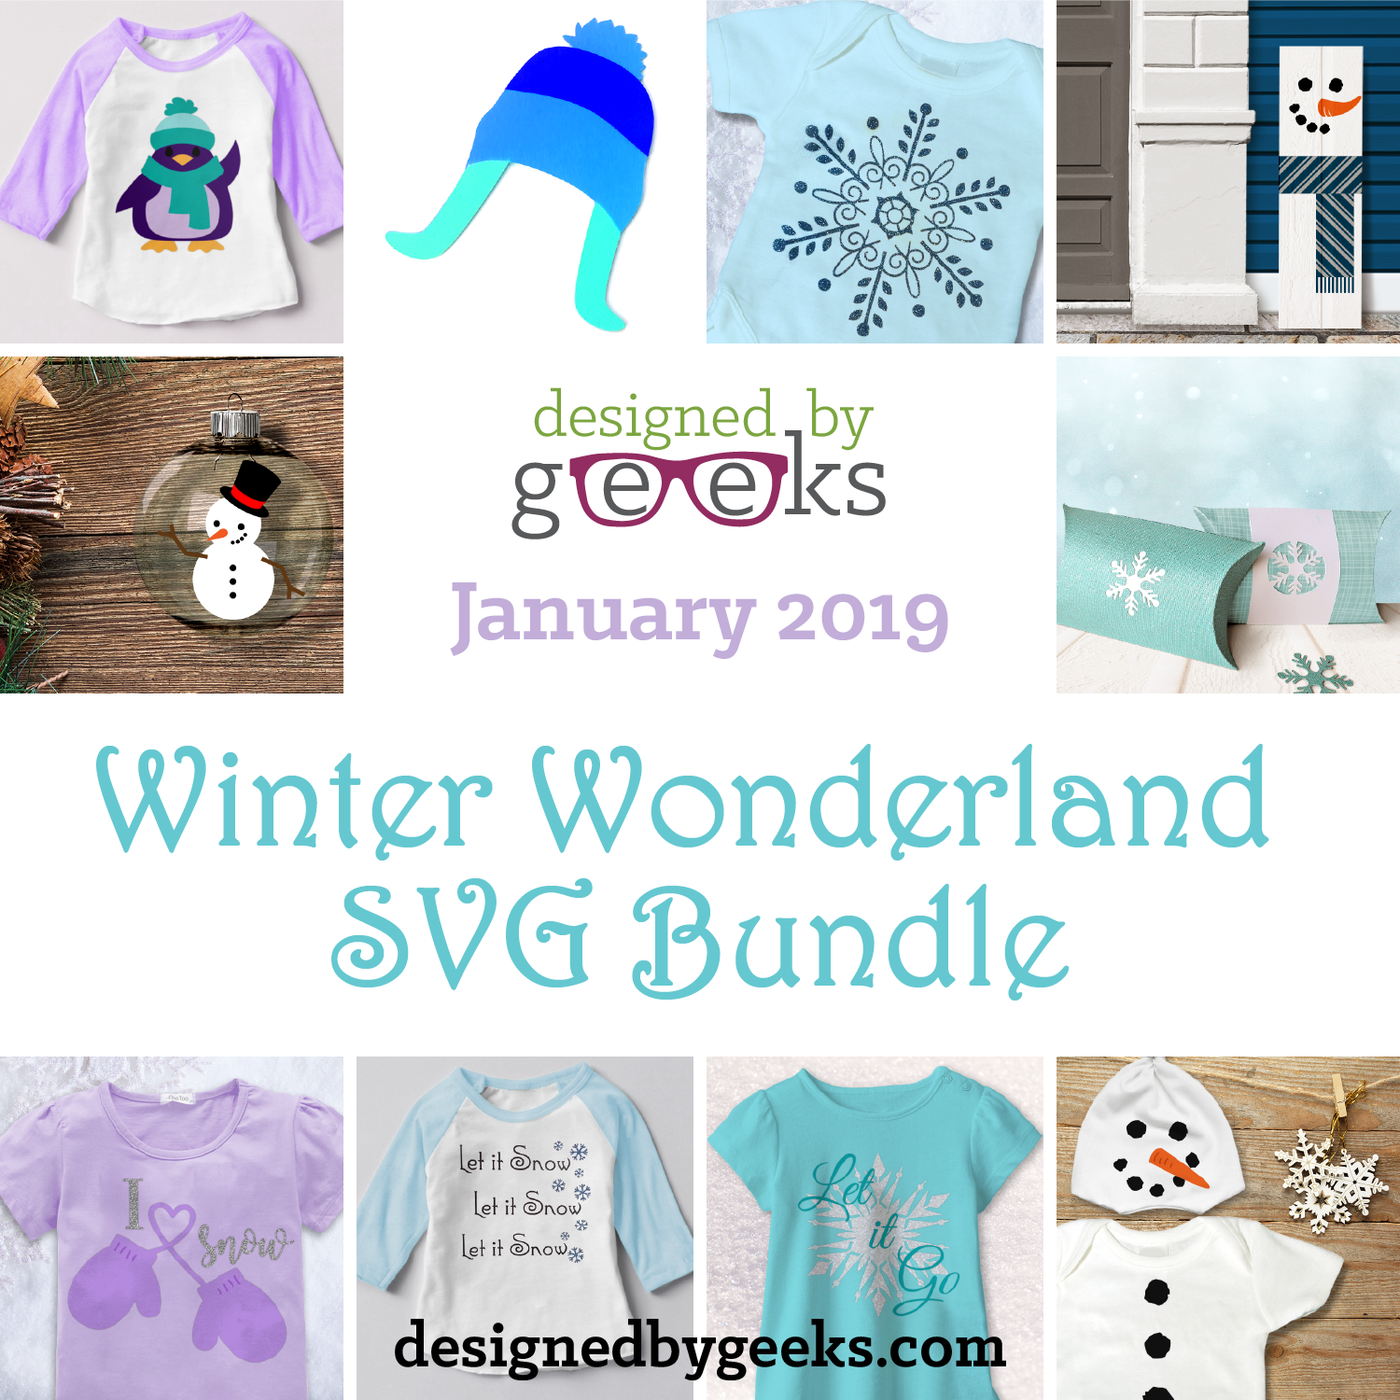 Grid of 10 winter and snow themed SVG designs. Text on the image says "Designed by Geeks January 2019 Winter Wonderland SVG Bundle."